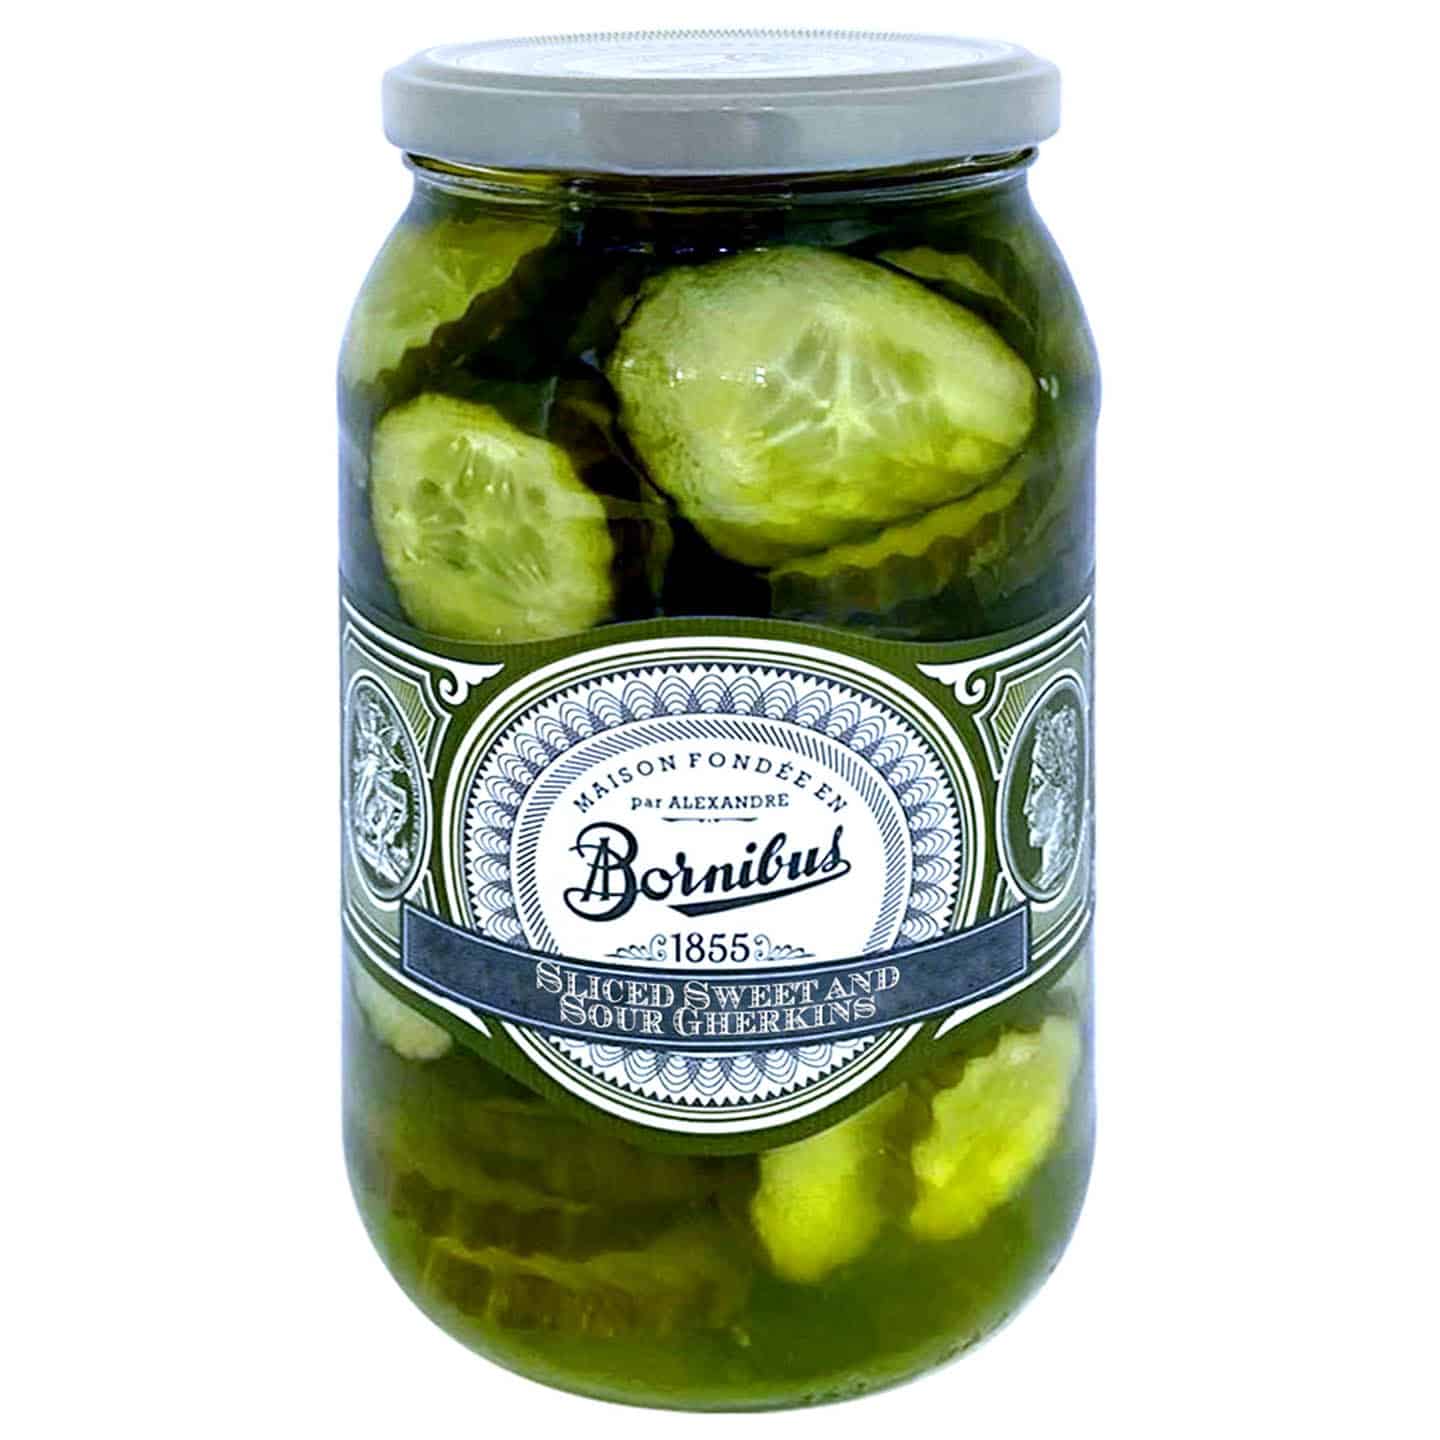 BS1628---Sliced-sweet-and-sour-gherkins